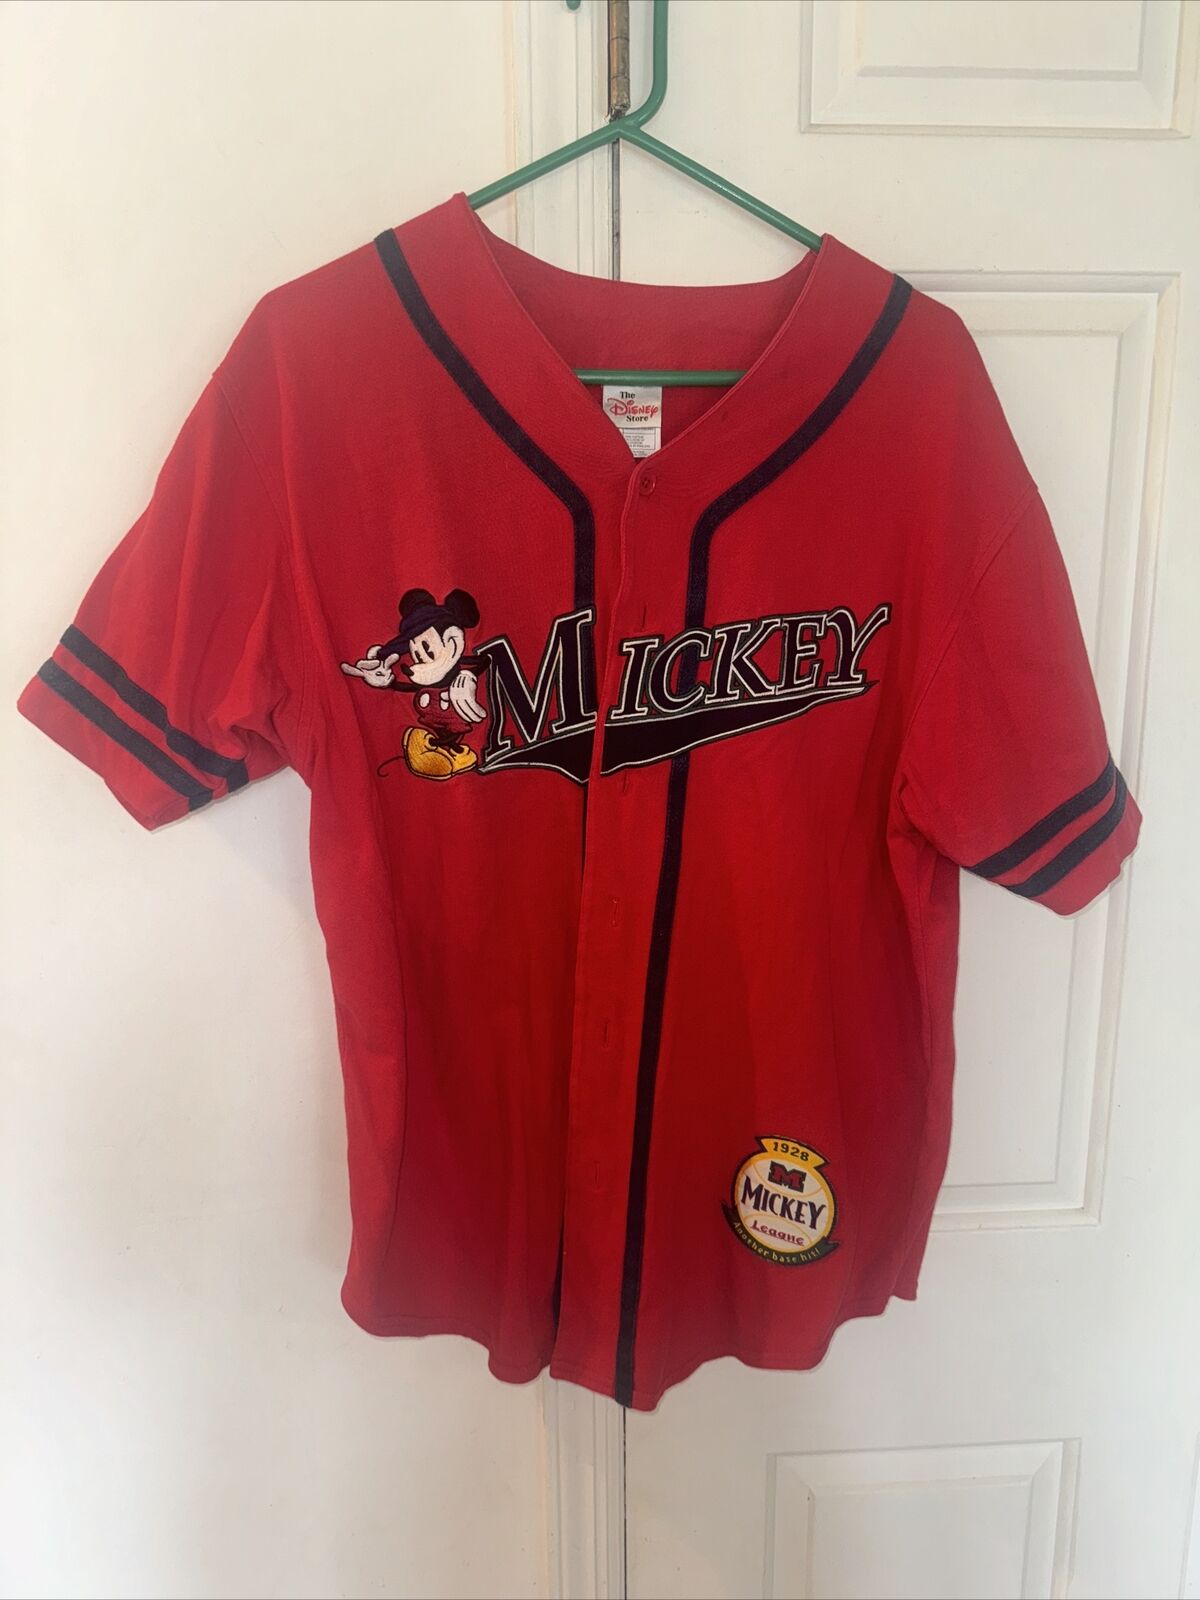 Vintage The Disney Store Micky Mouse Baseball Shirt Jersey Red Size Medium Adult